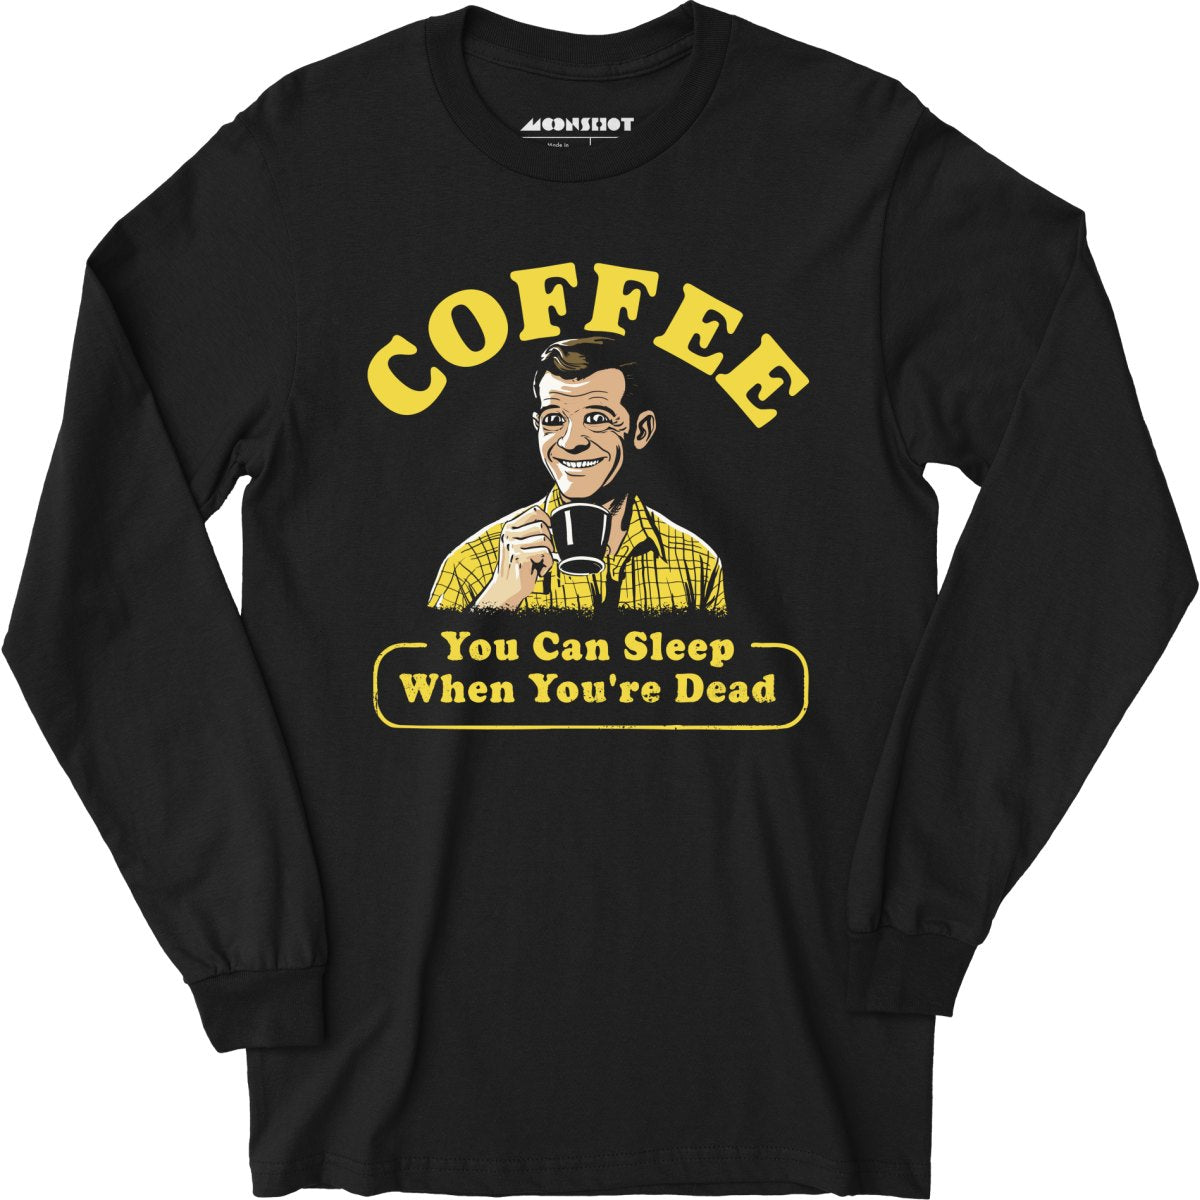 Coffee - You Can Sleep When You're Dead - Long Sleeve T-Shirt